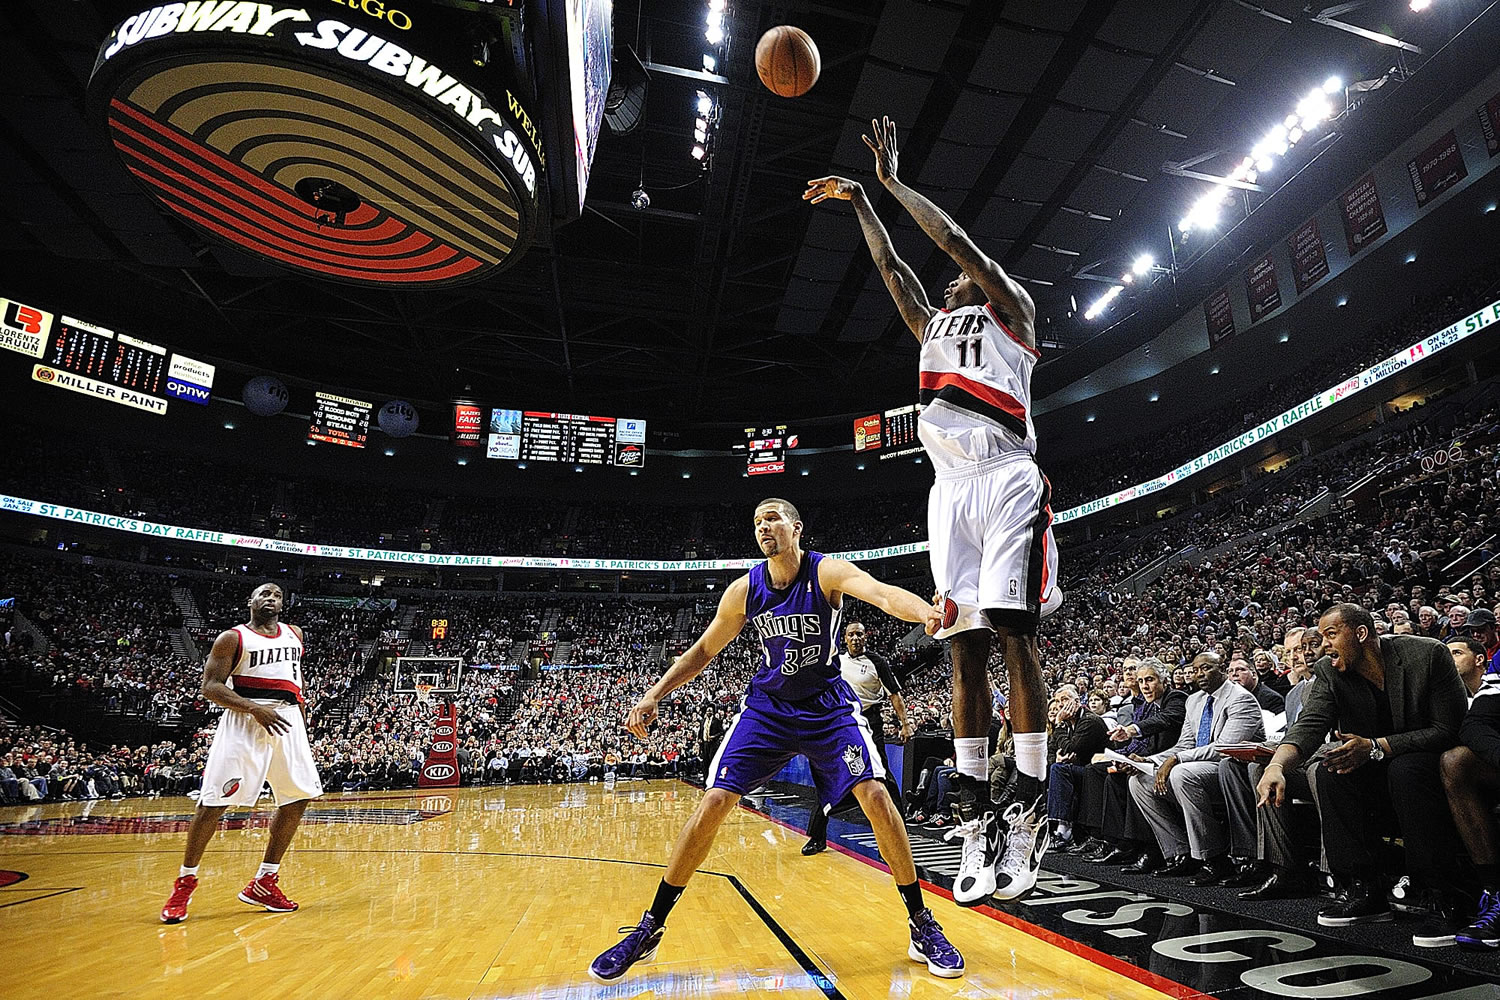 The Moda Center could be home to the NBA All-Star Game in 2017 or 2018. The Portland Trail Blazers submitted their bid this week.